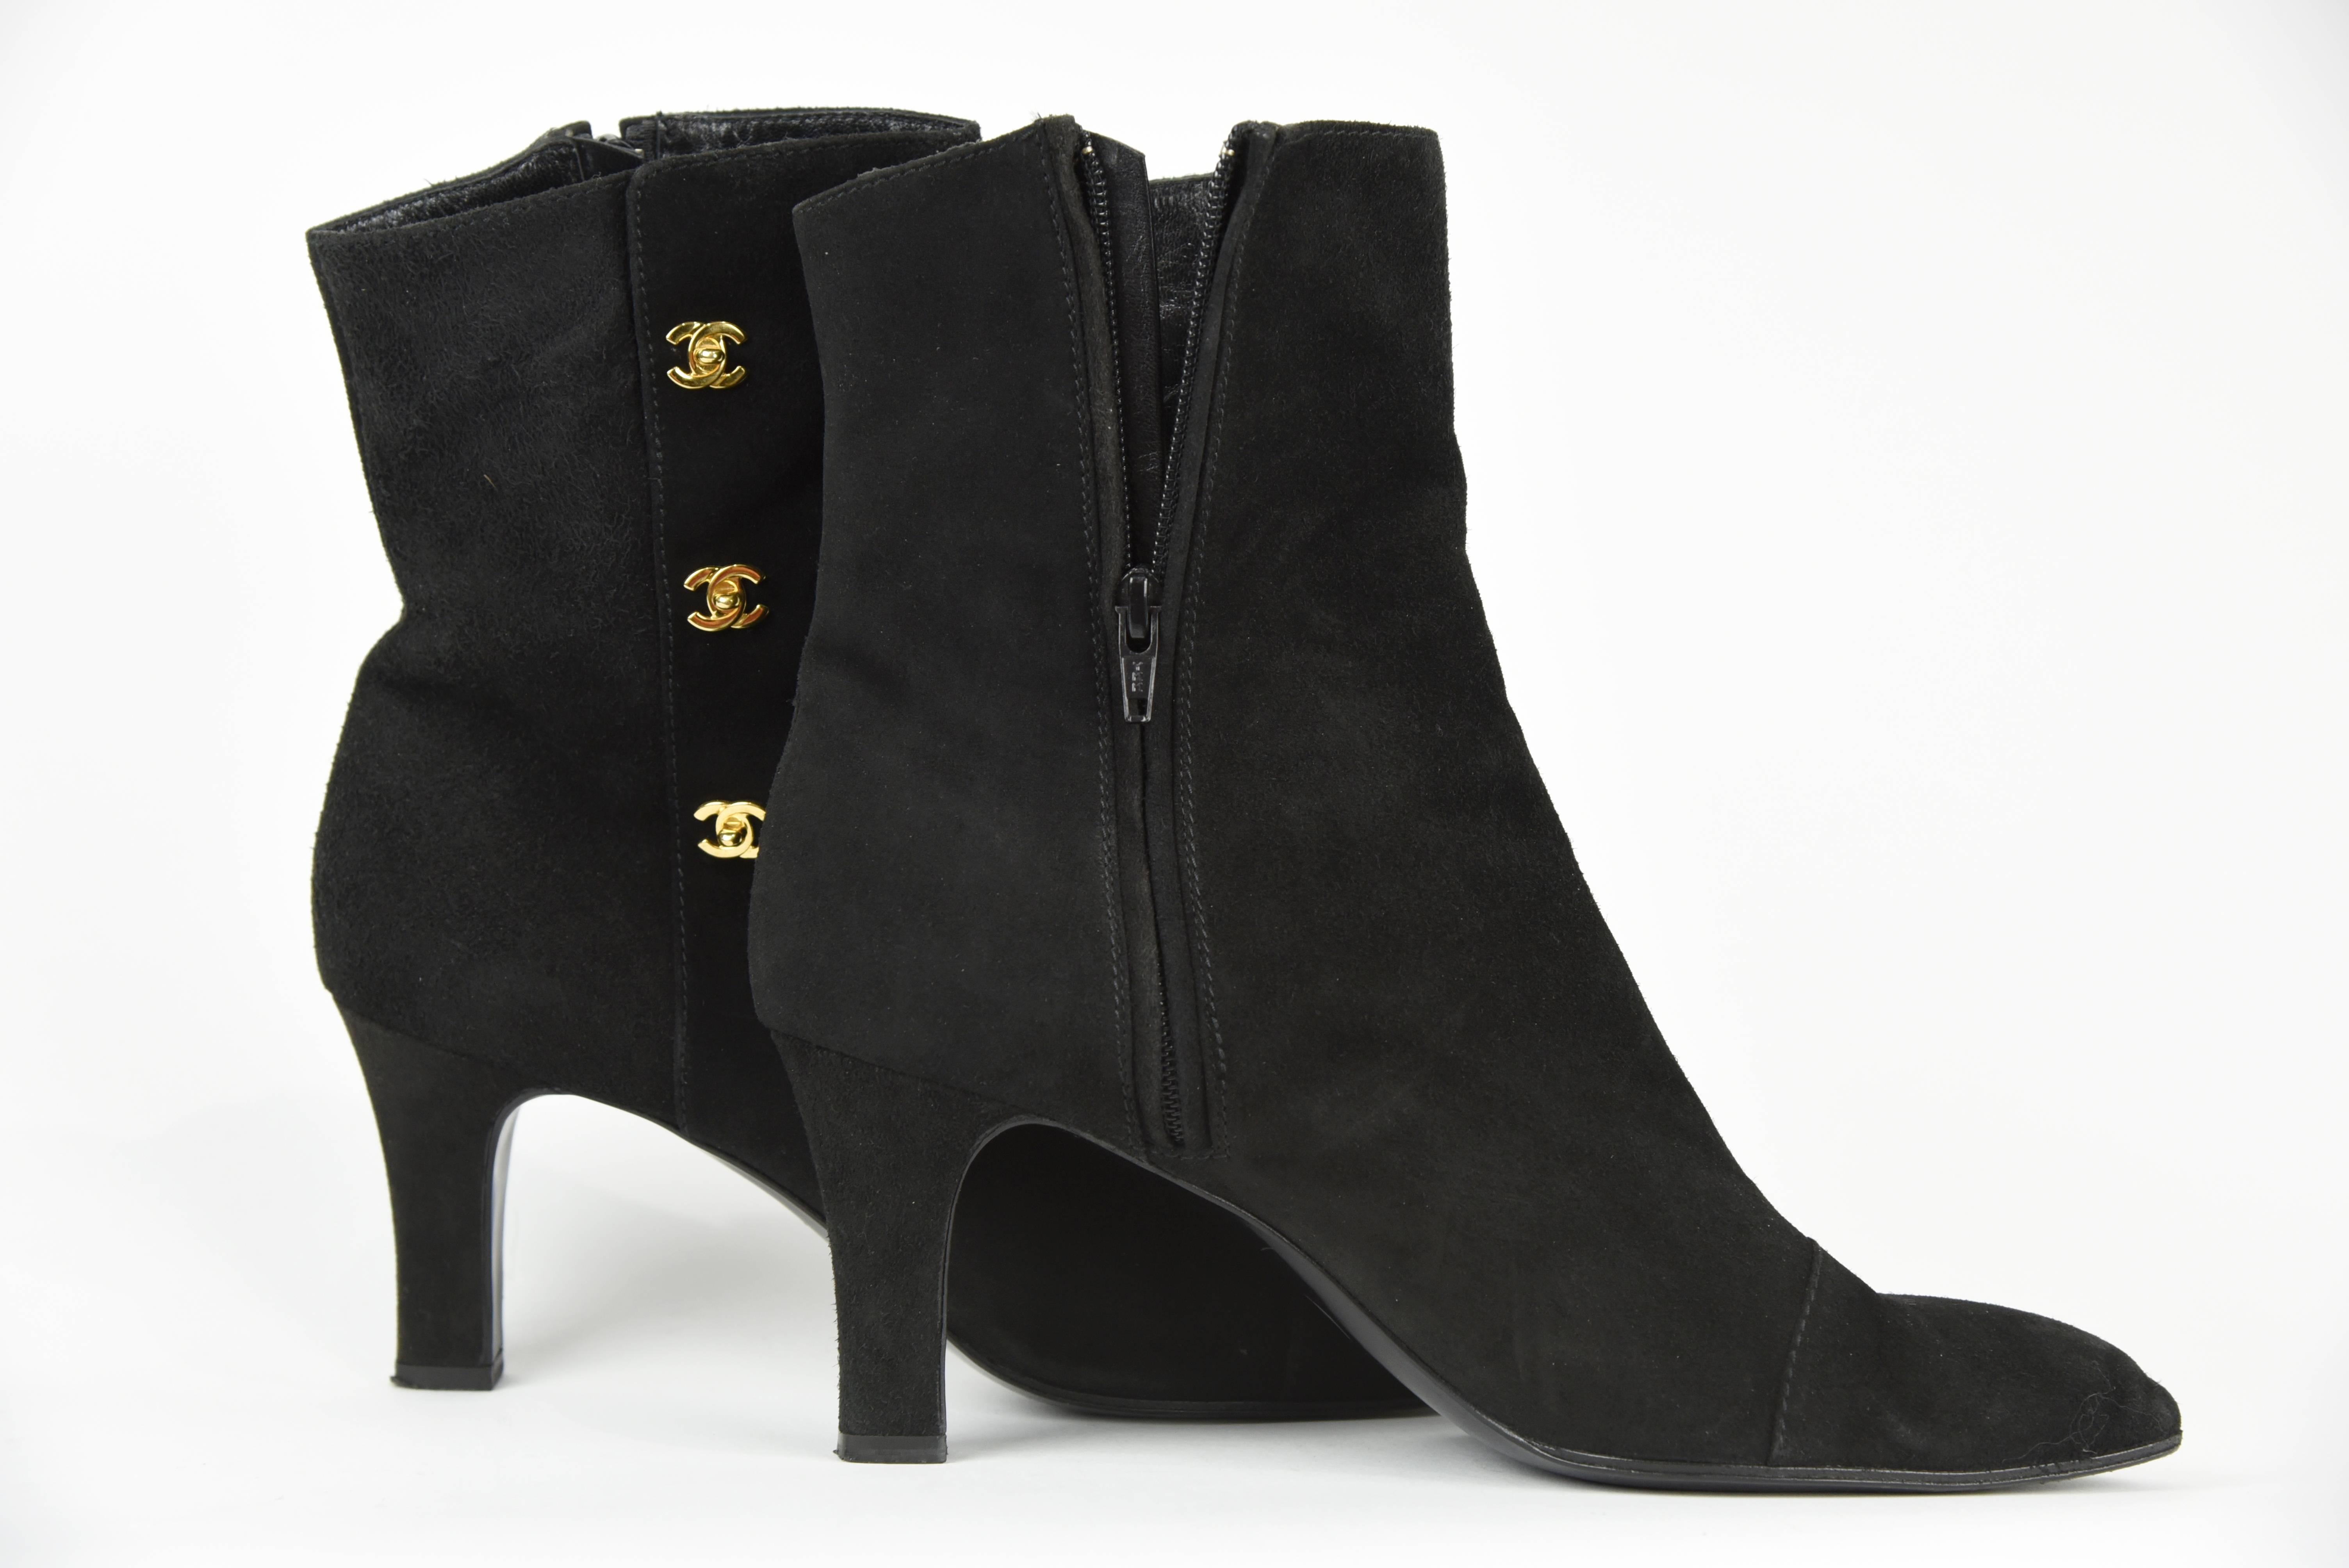 Women's Chanel 1990s Black Suede Ankle Boots with 3 Gold 